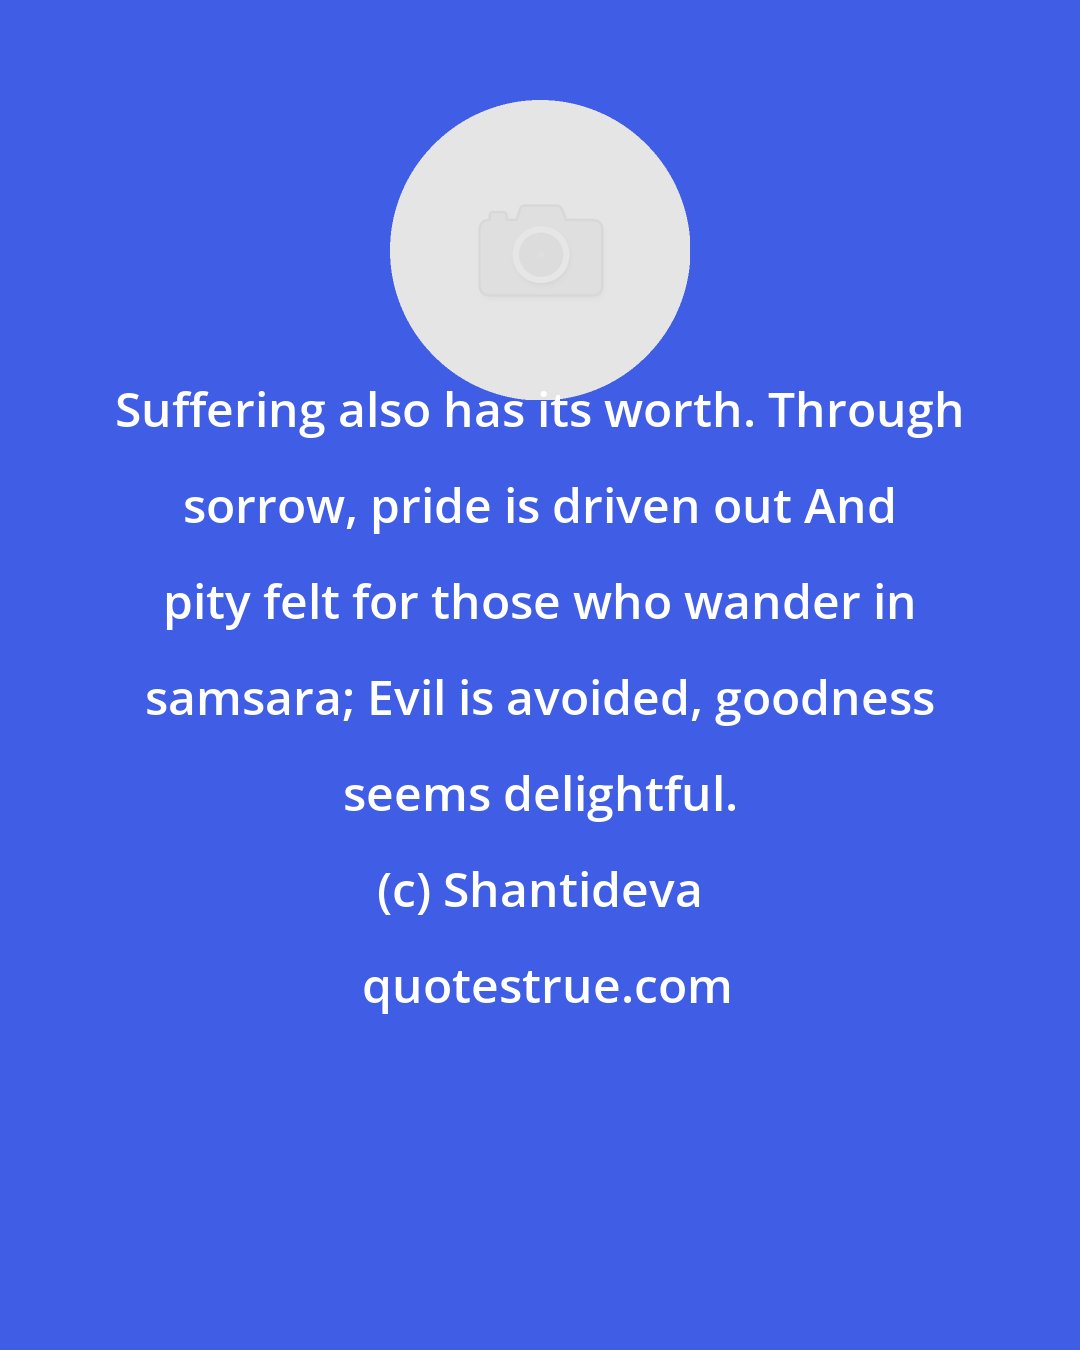 Shantideva: Suffering also has its worth. Through sorrow, pride is driven out And pity felt for those who wander in samsara; Evil is avoided, goodness seems delightful.